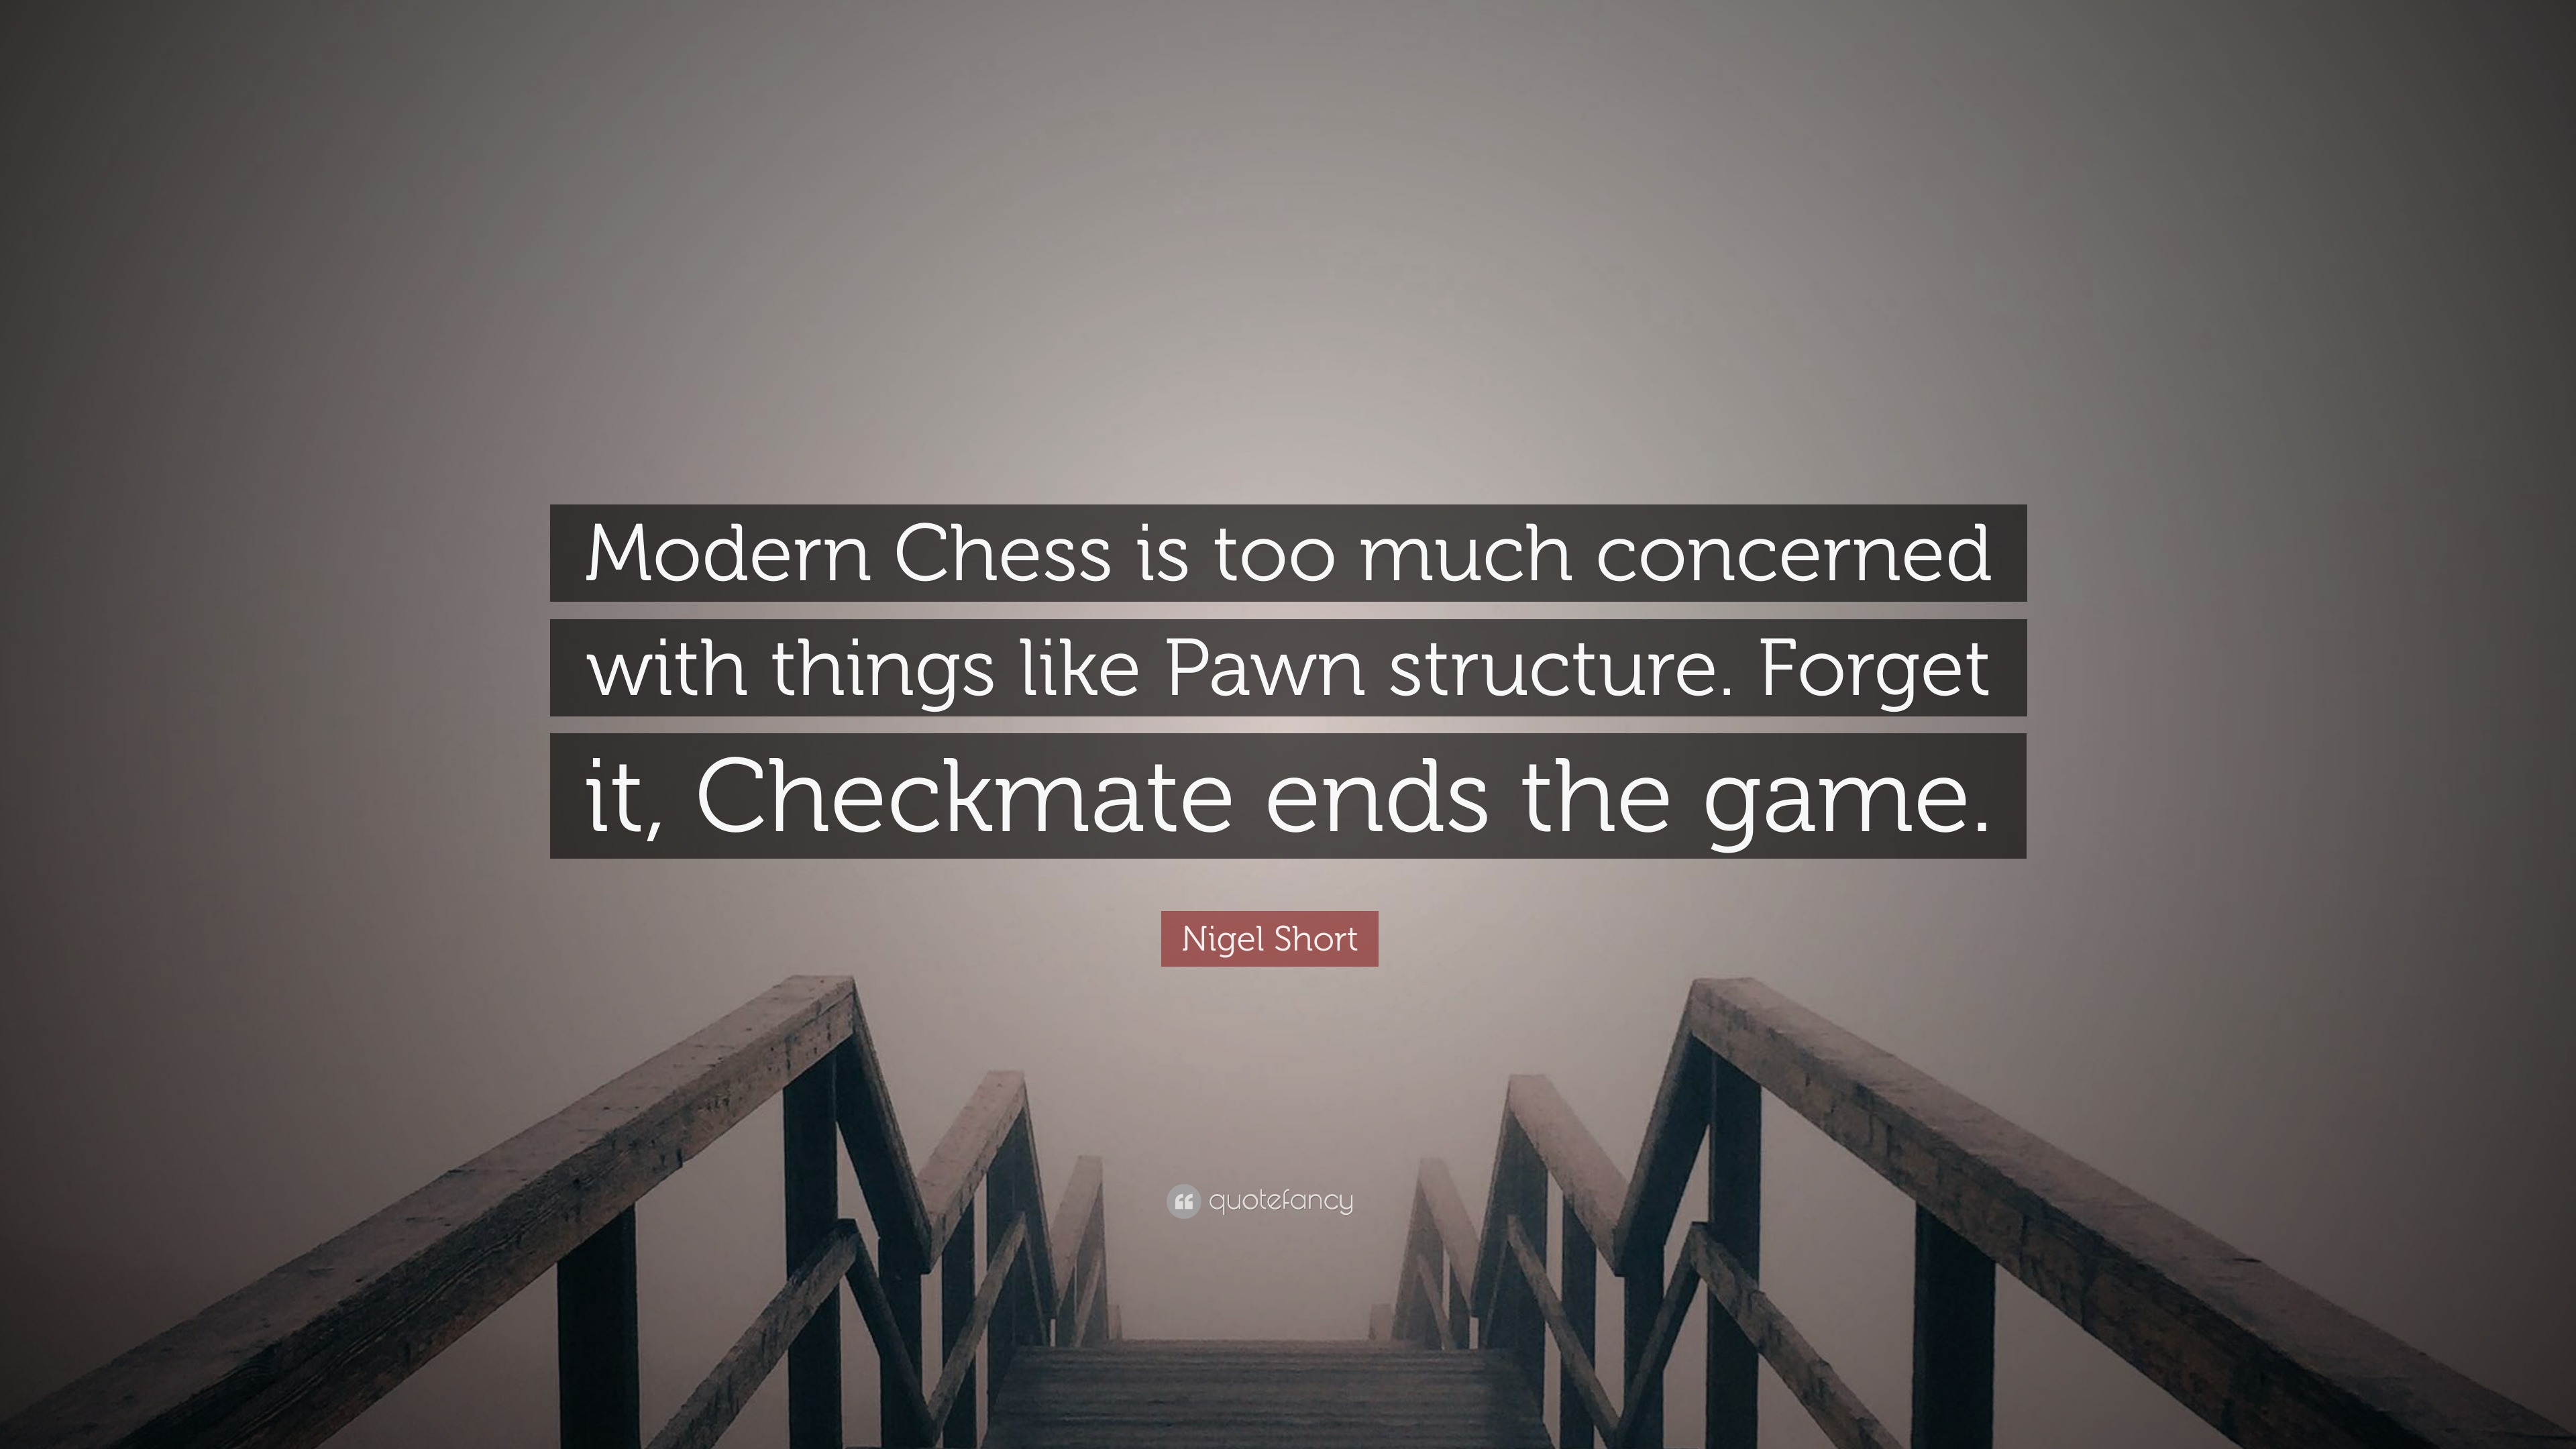 chessplayer on Instagram: Tal🔥 . . . #chess #chessboard #boardgame #game  #win #mem #chessmem #check #mate #checkmate #champion #quote #lose #joke  #smile #games #king #queen #bishop #knight #rook #pawn #bishop